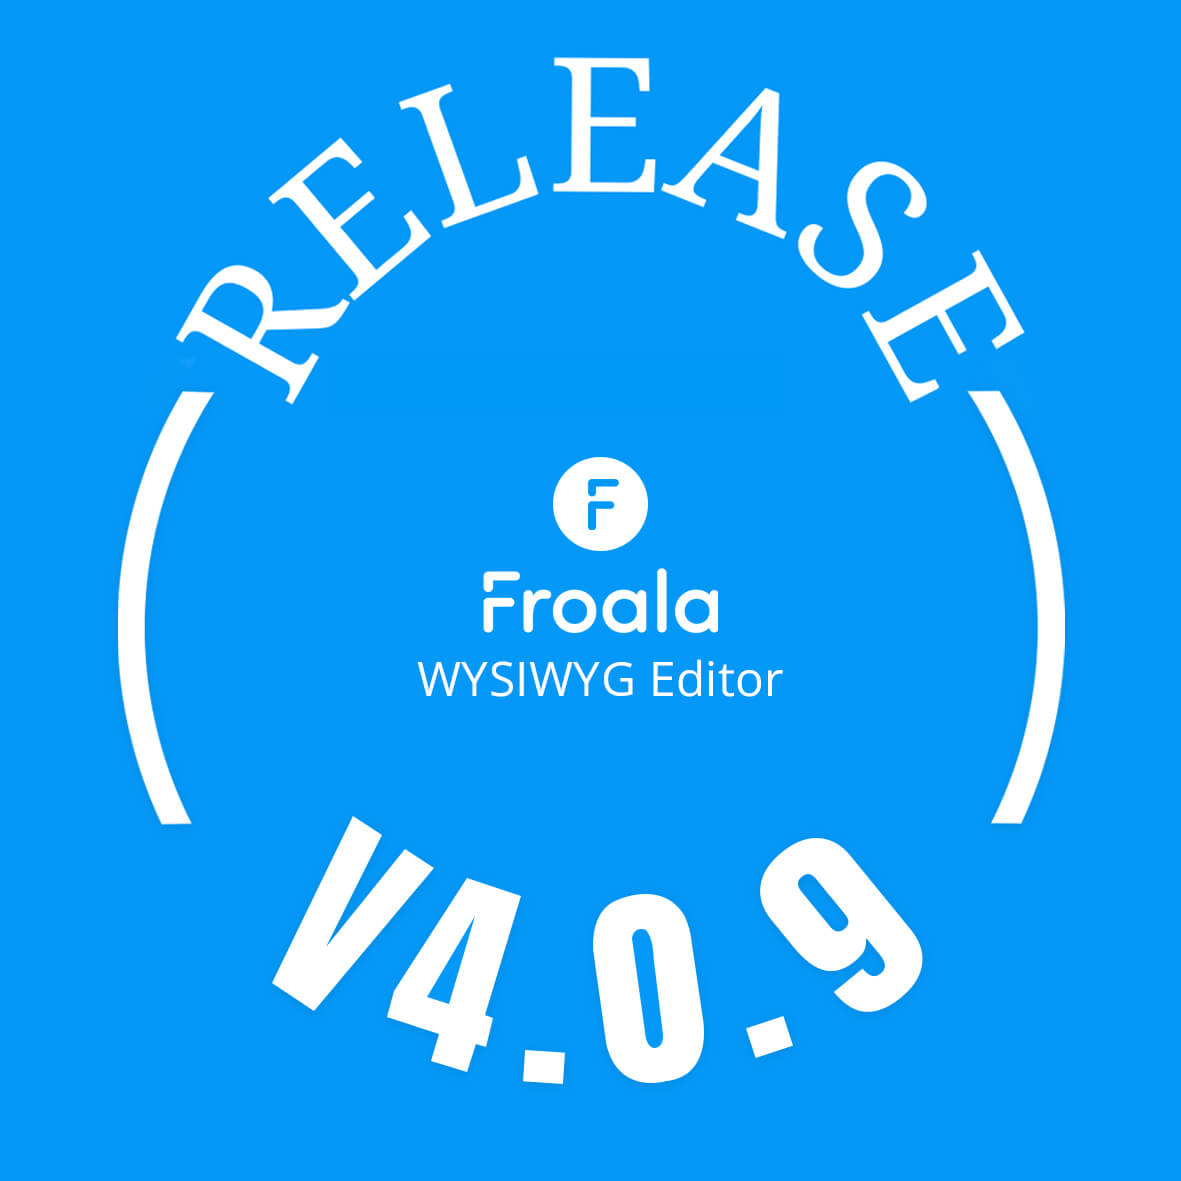 Graphic announcing Froala WYSIWYG Editor Release V4.0.9 on a blue background.